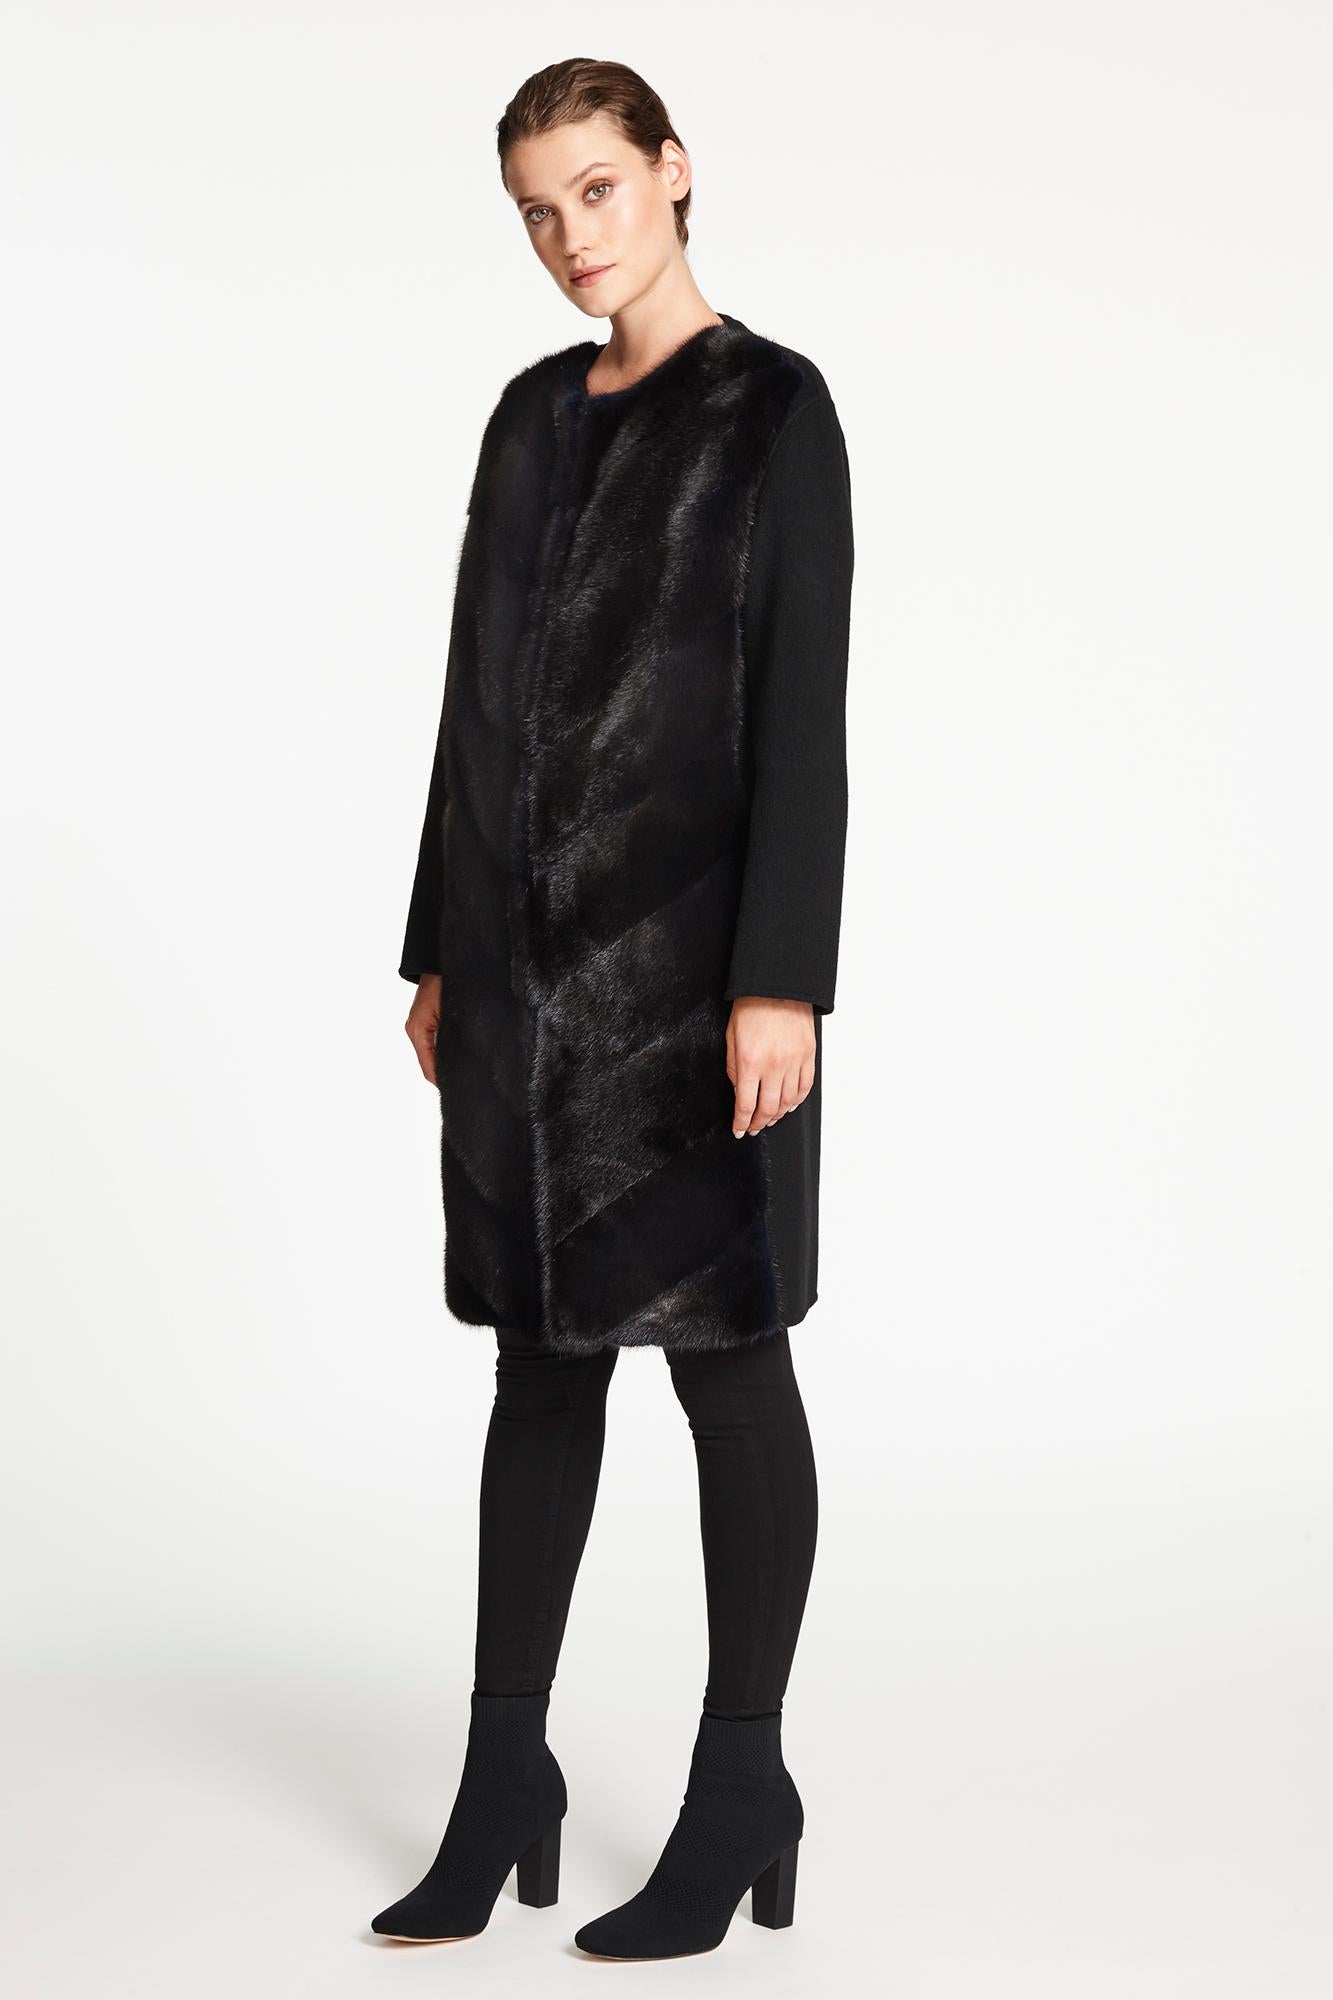 Brand New Collarless Coat Cashmere and in Navy Black Mink Fur 4